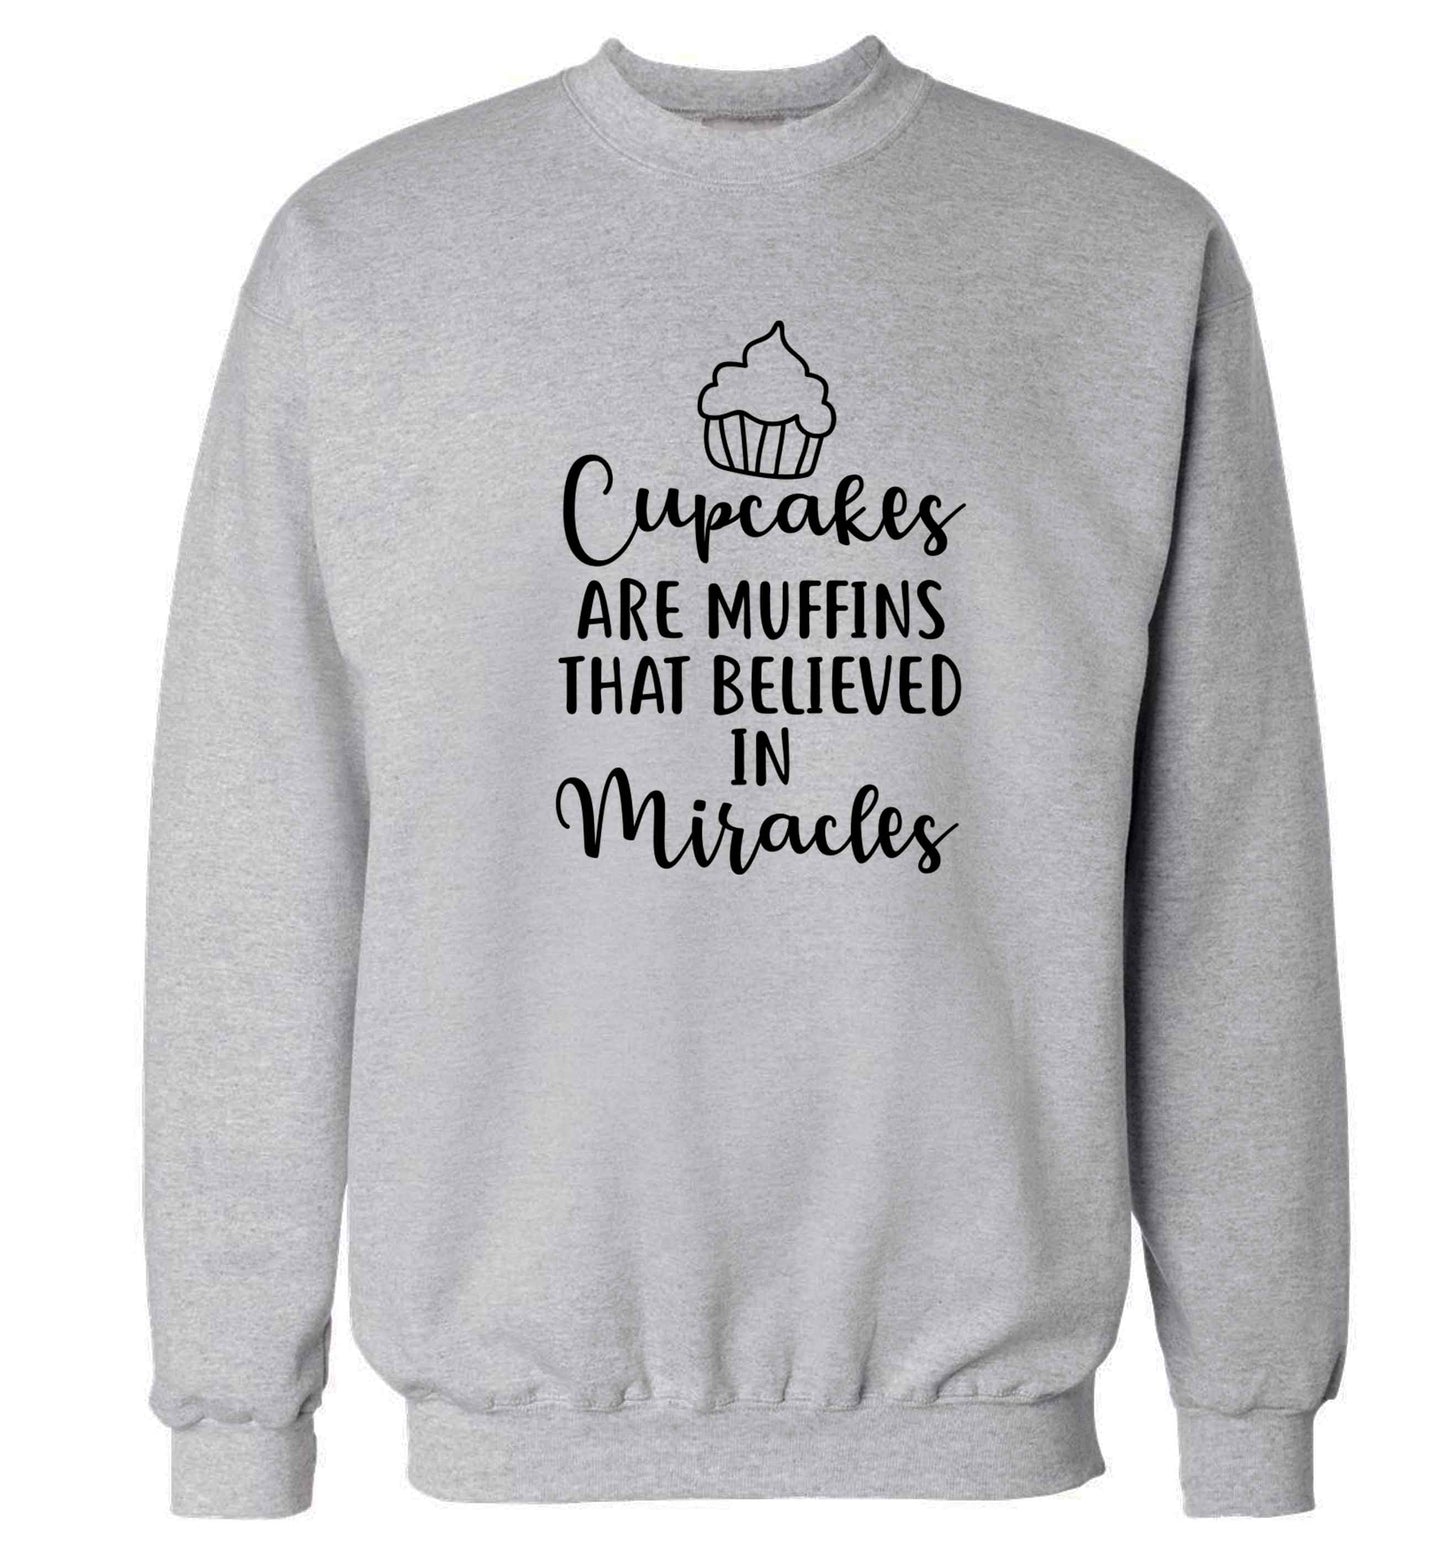 Cupcakes muffins that believed in miracles Adult's unisex grey Sweater 2XL